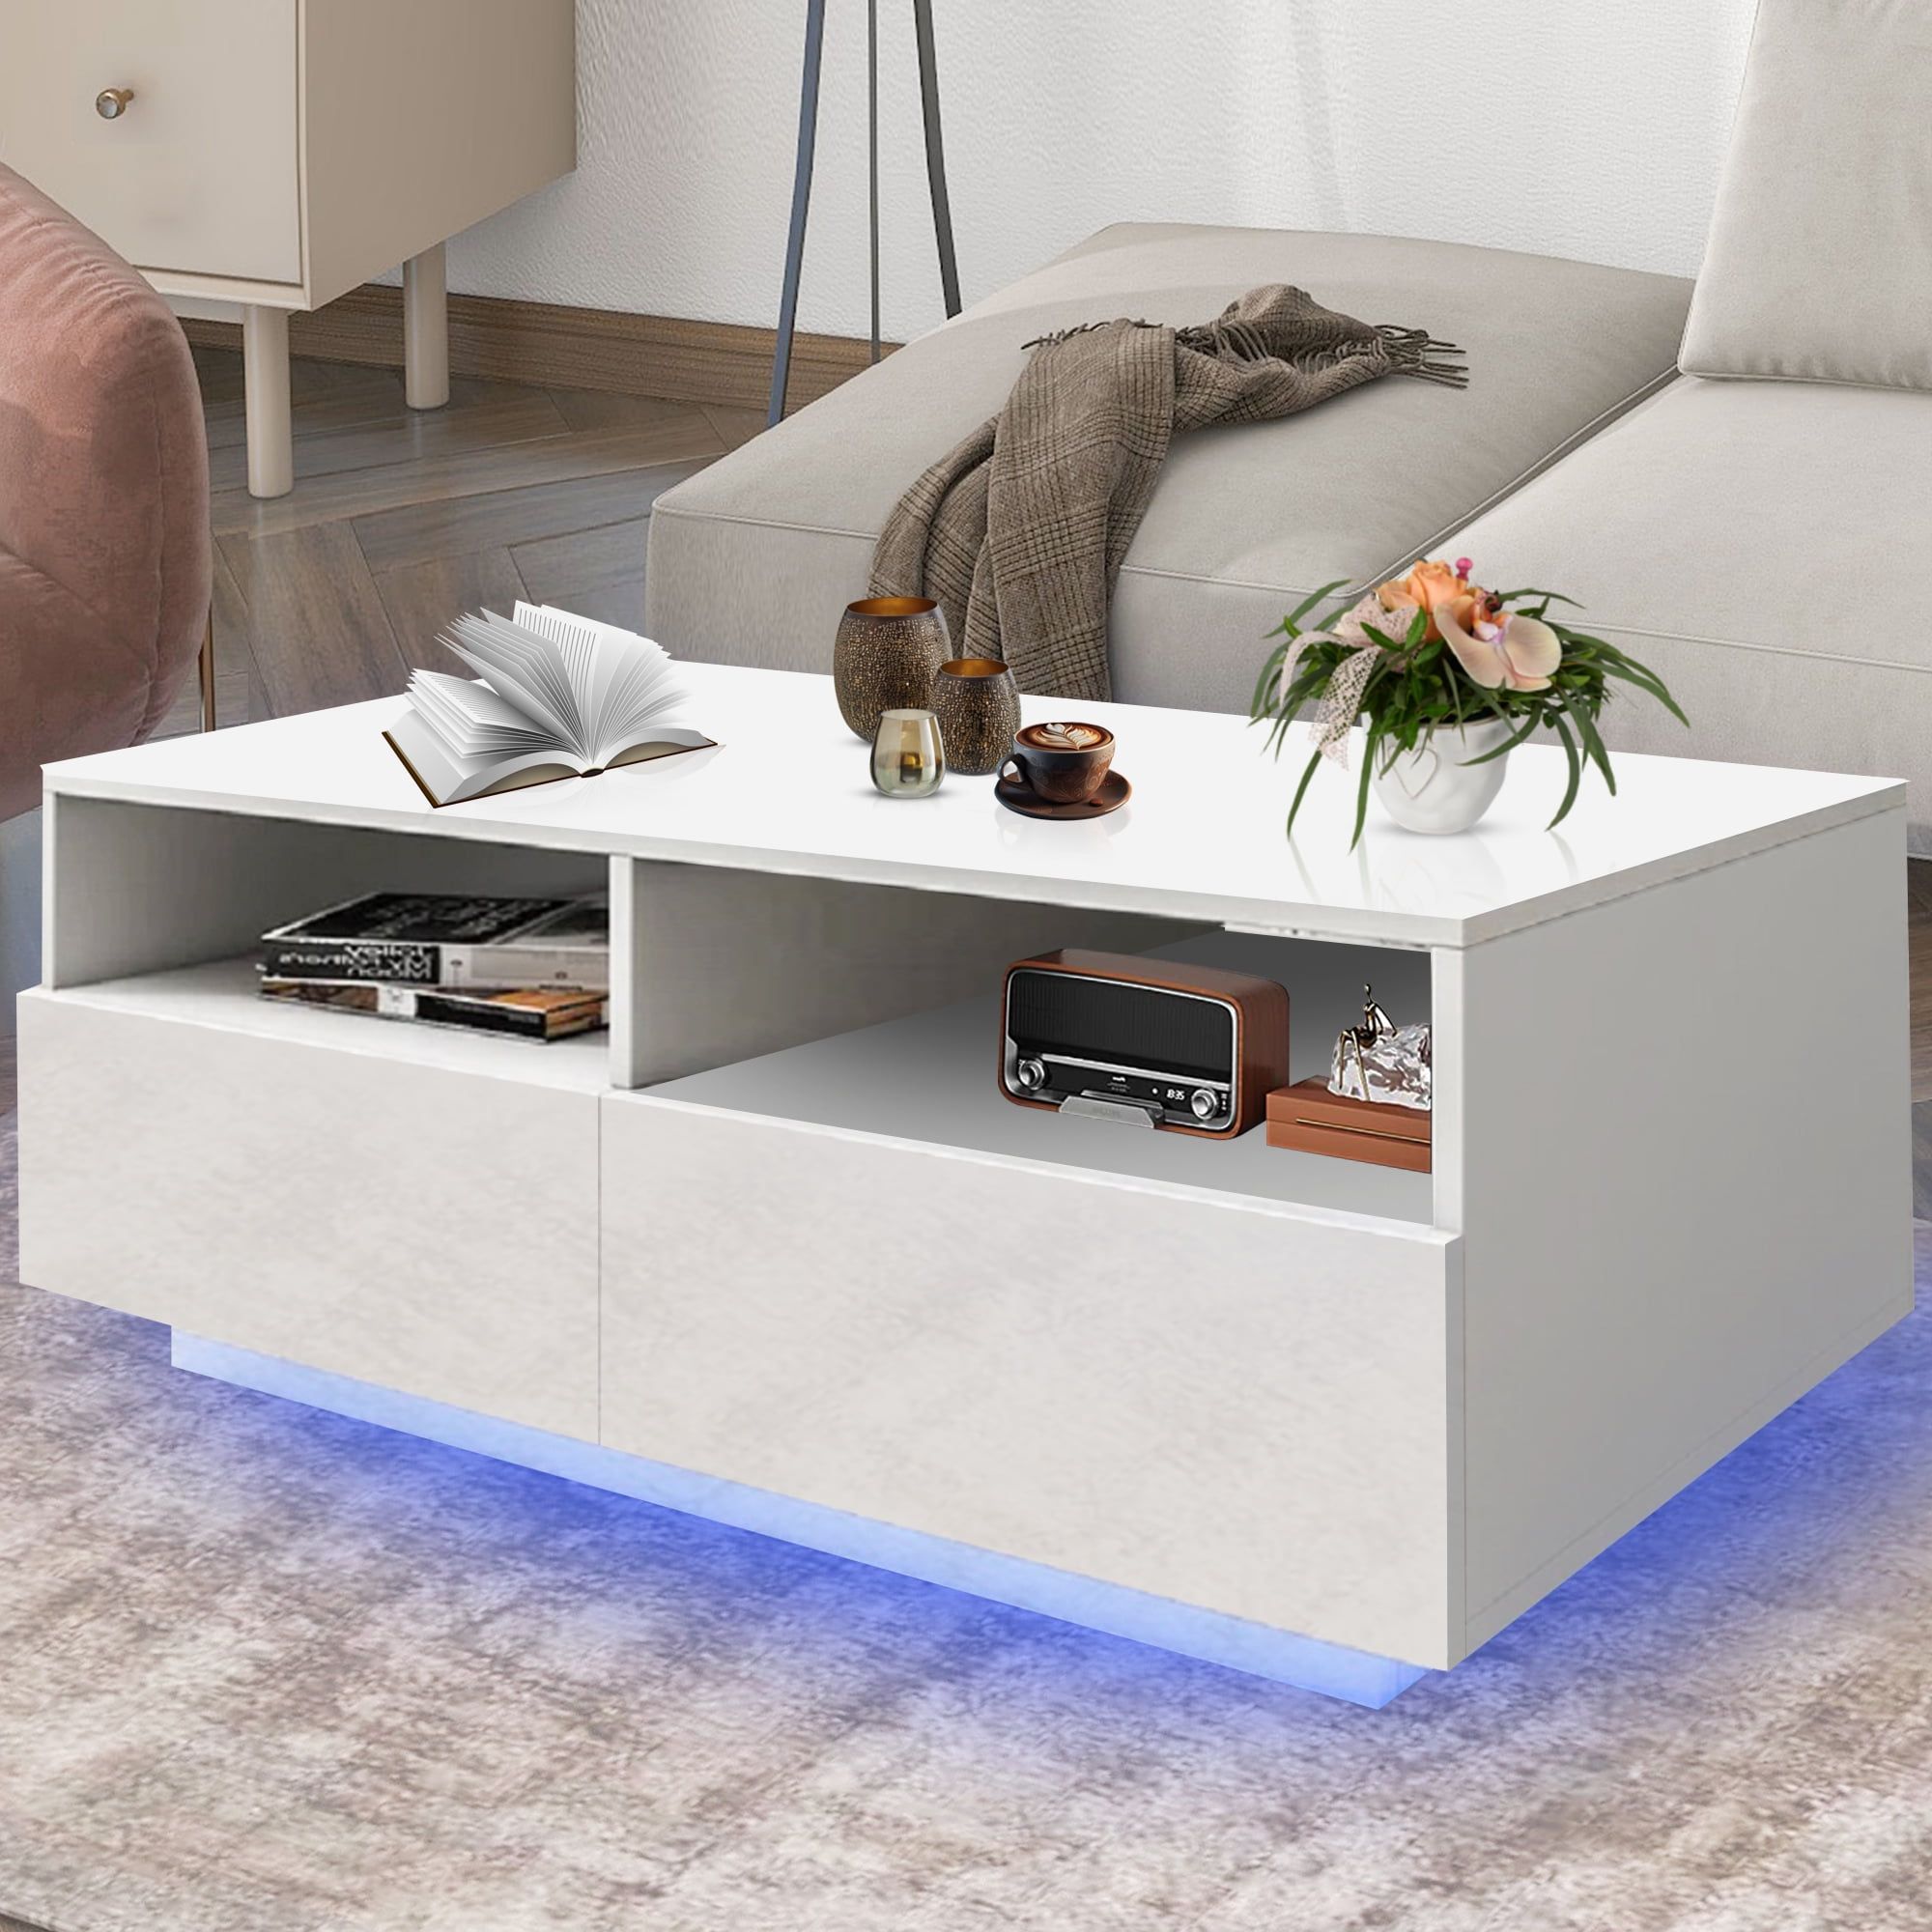 Syngar Led Coffee Table With 4 Storage Sliding Drawers And Open Shelves,  Modern High Glossy Center Table Rectangular With Multiple Colors Led Lights  For Living Room Bedroom, Easy Assembly, White – Walmart Regarding Led Coffee Tables With 4 Drawers (View 6 of 15)